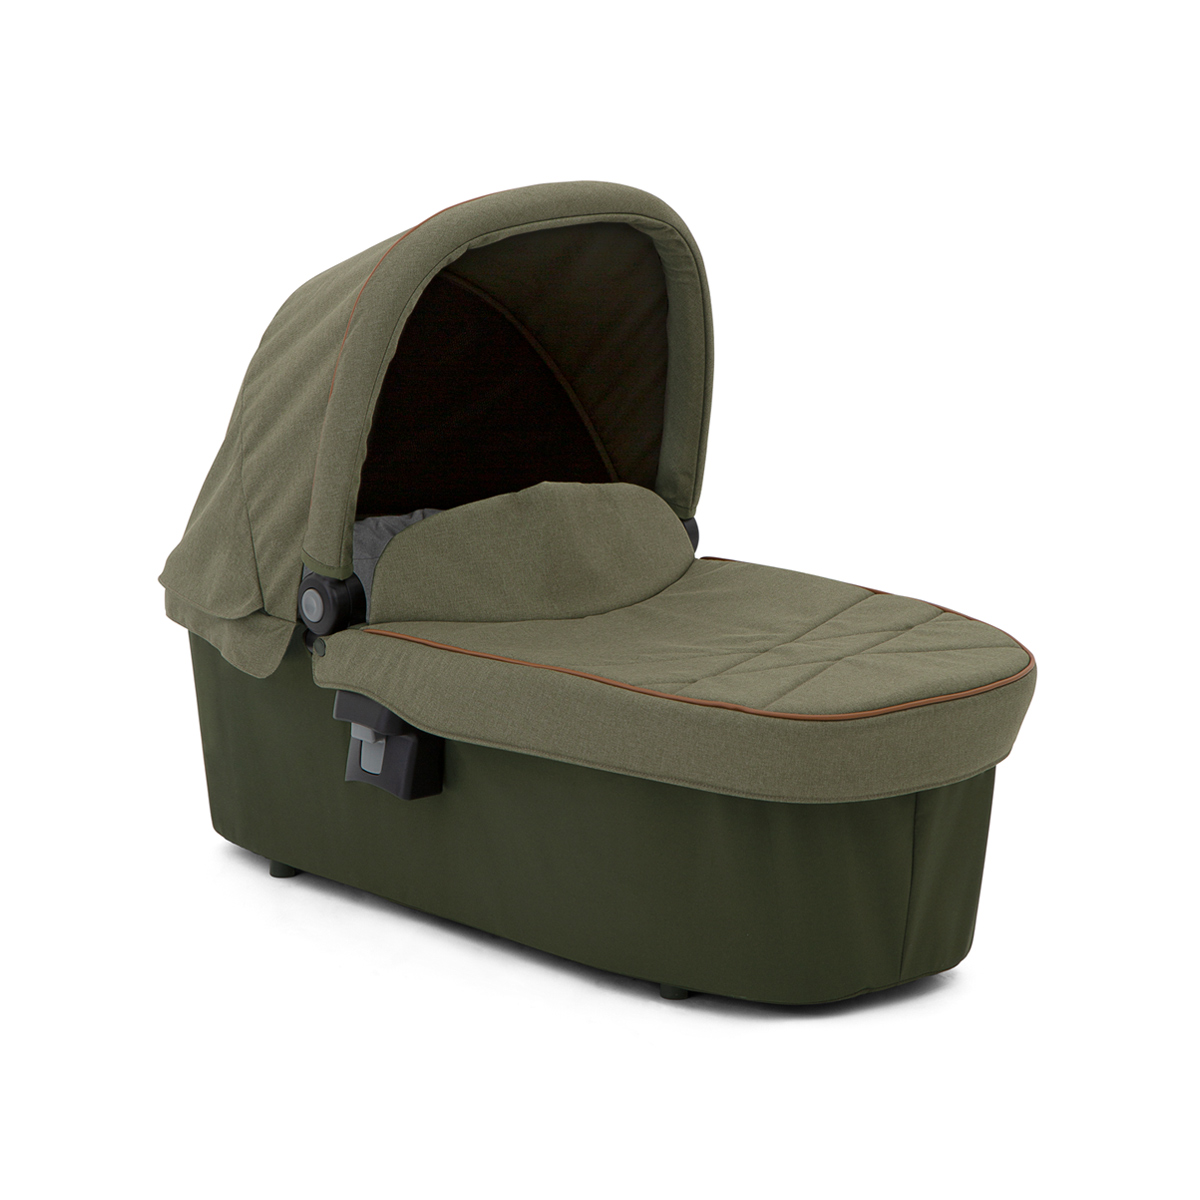 Graco Near2Me carrycot with apron three quarter angle